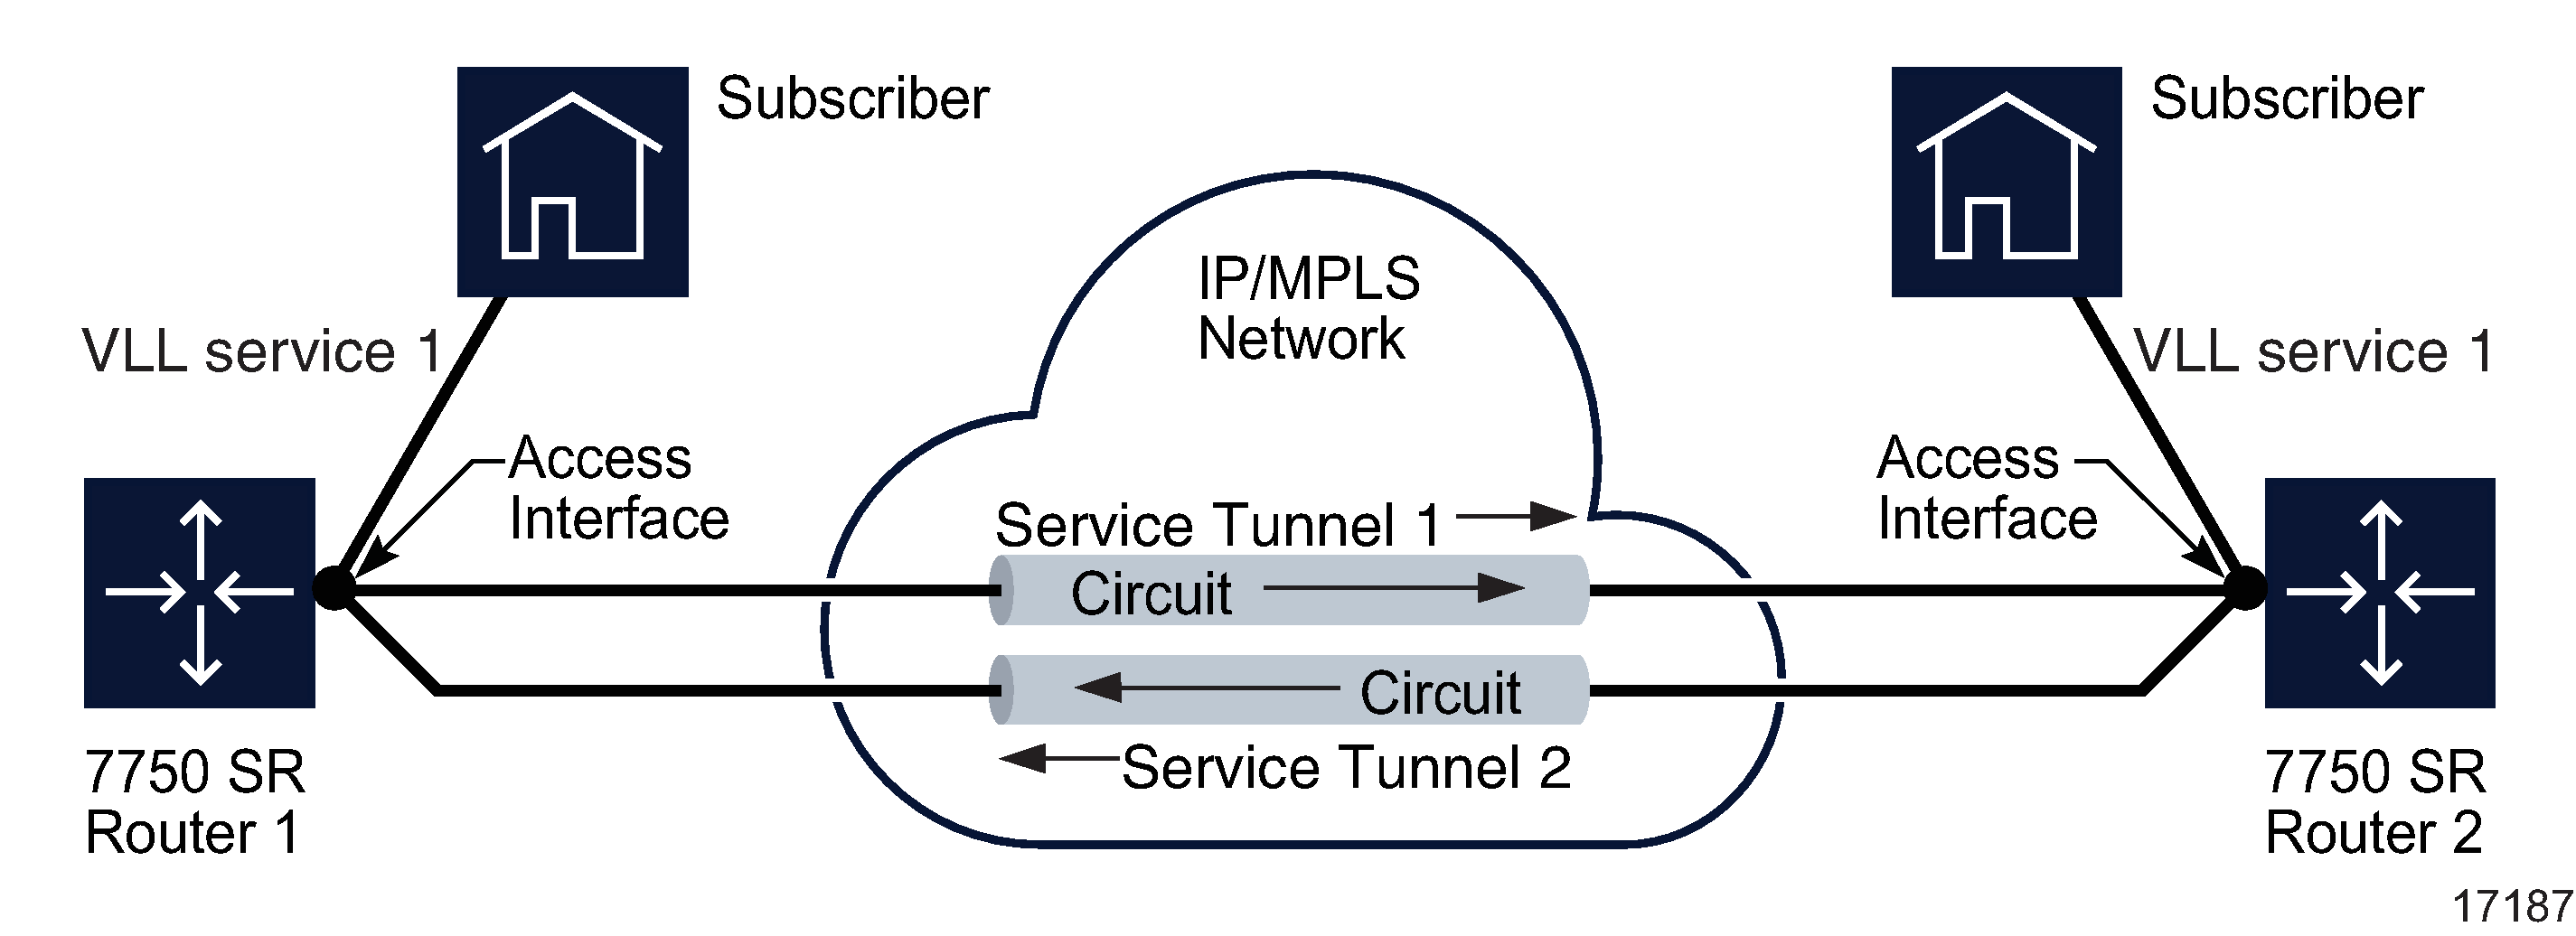 Distributed VLL service